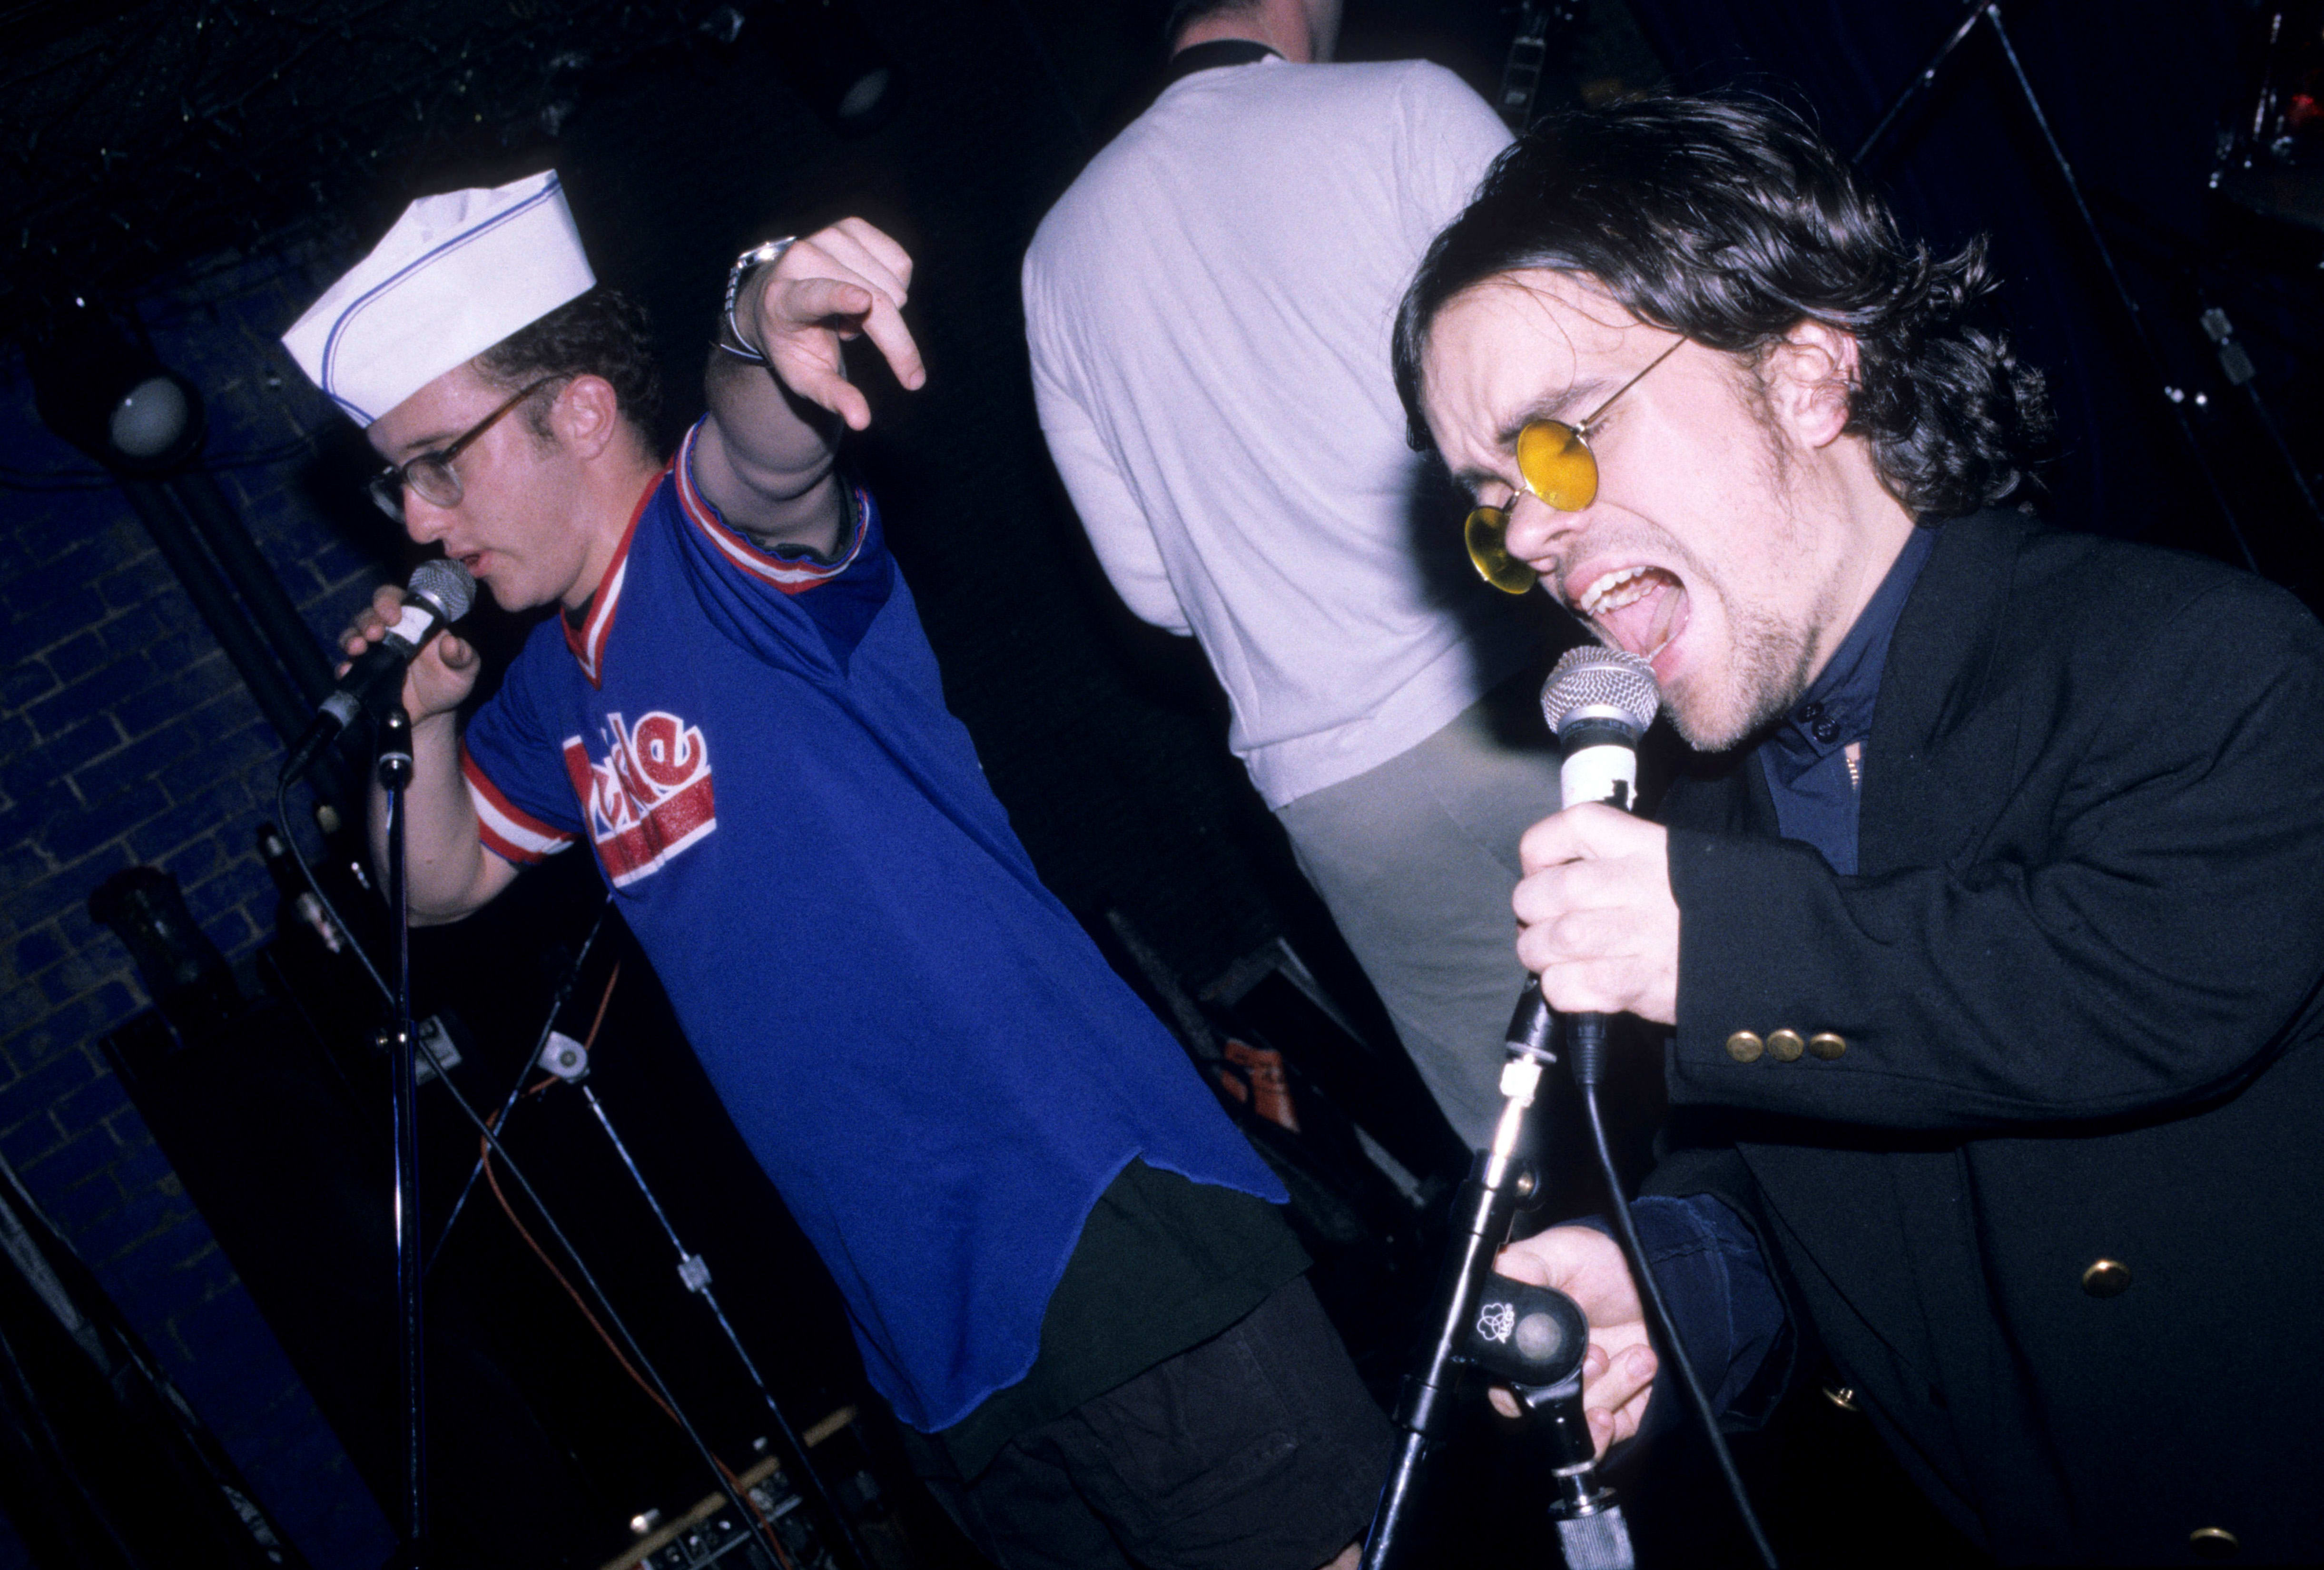 Peter Dinklage performs live with Whizzy at Columbia University on October 1, 1994